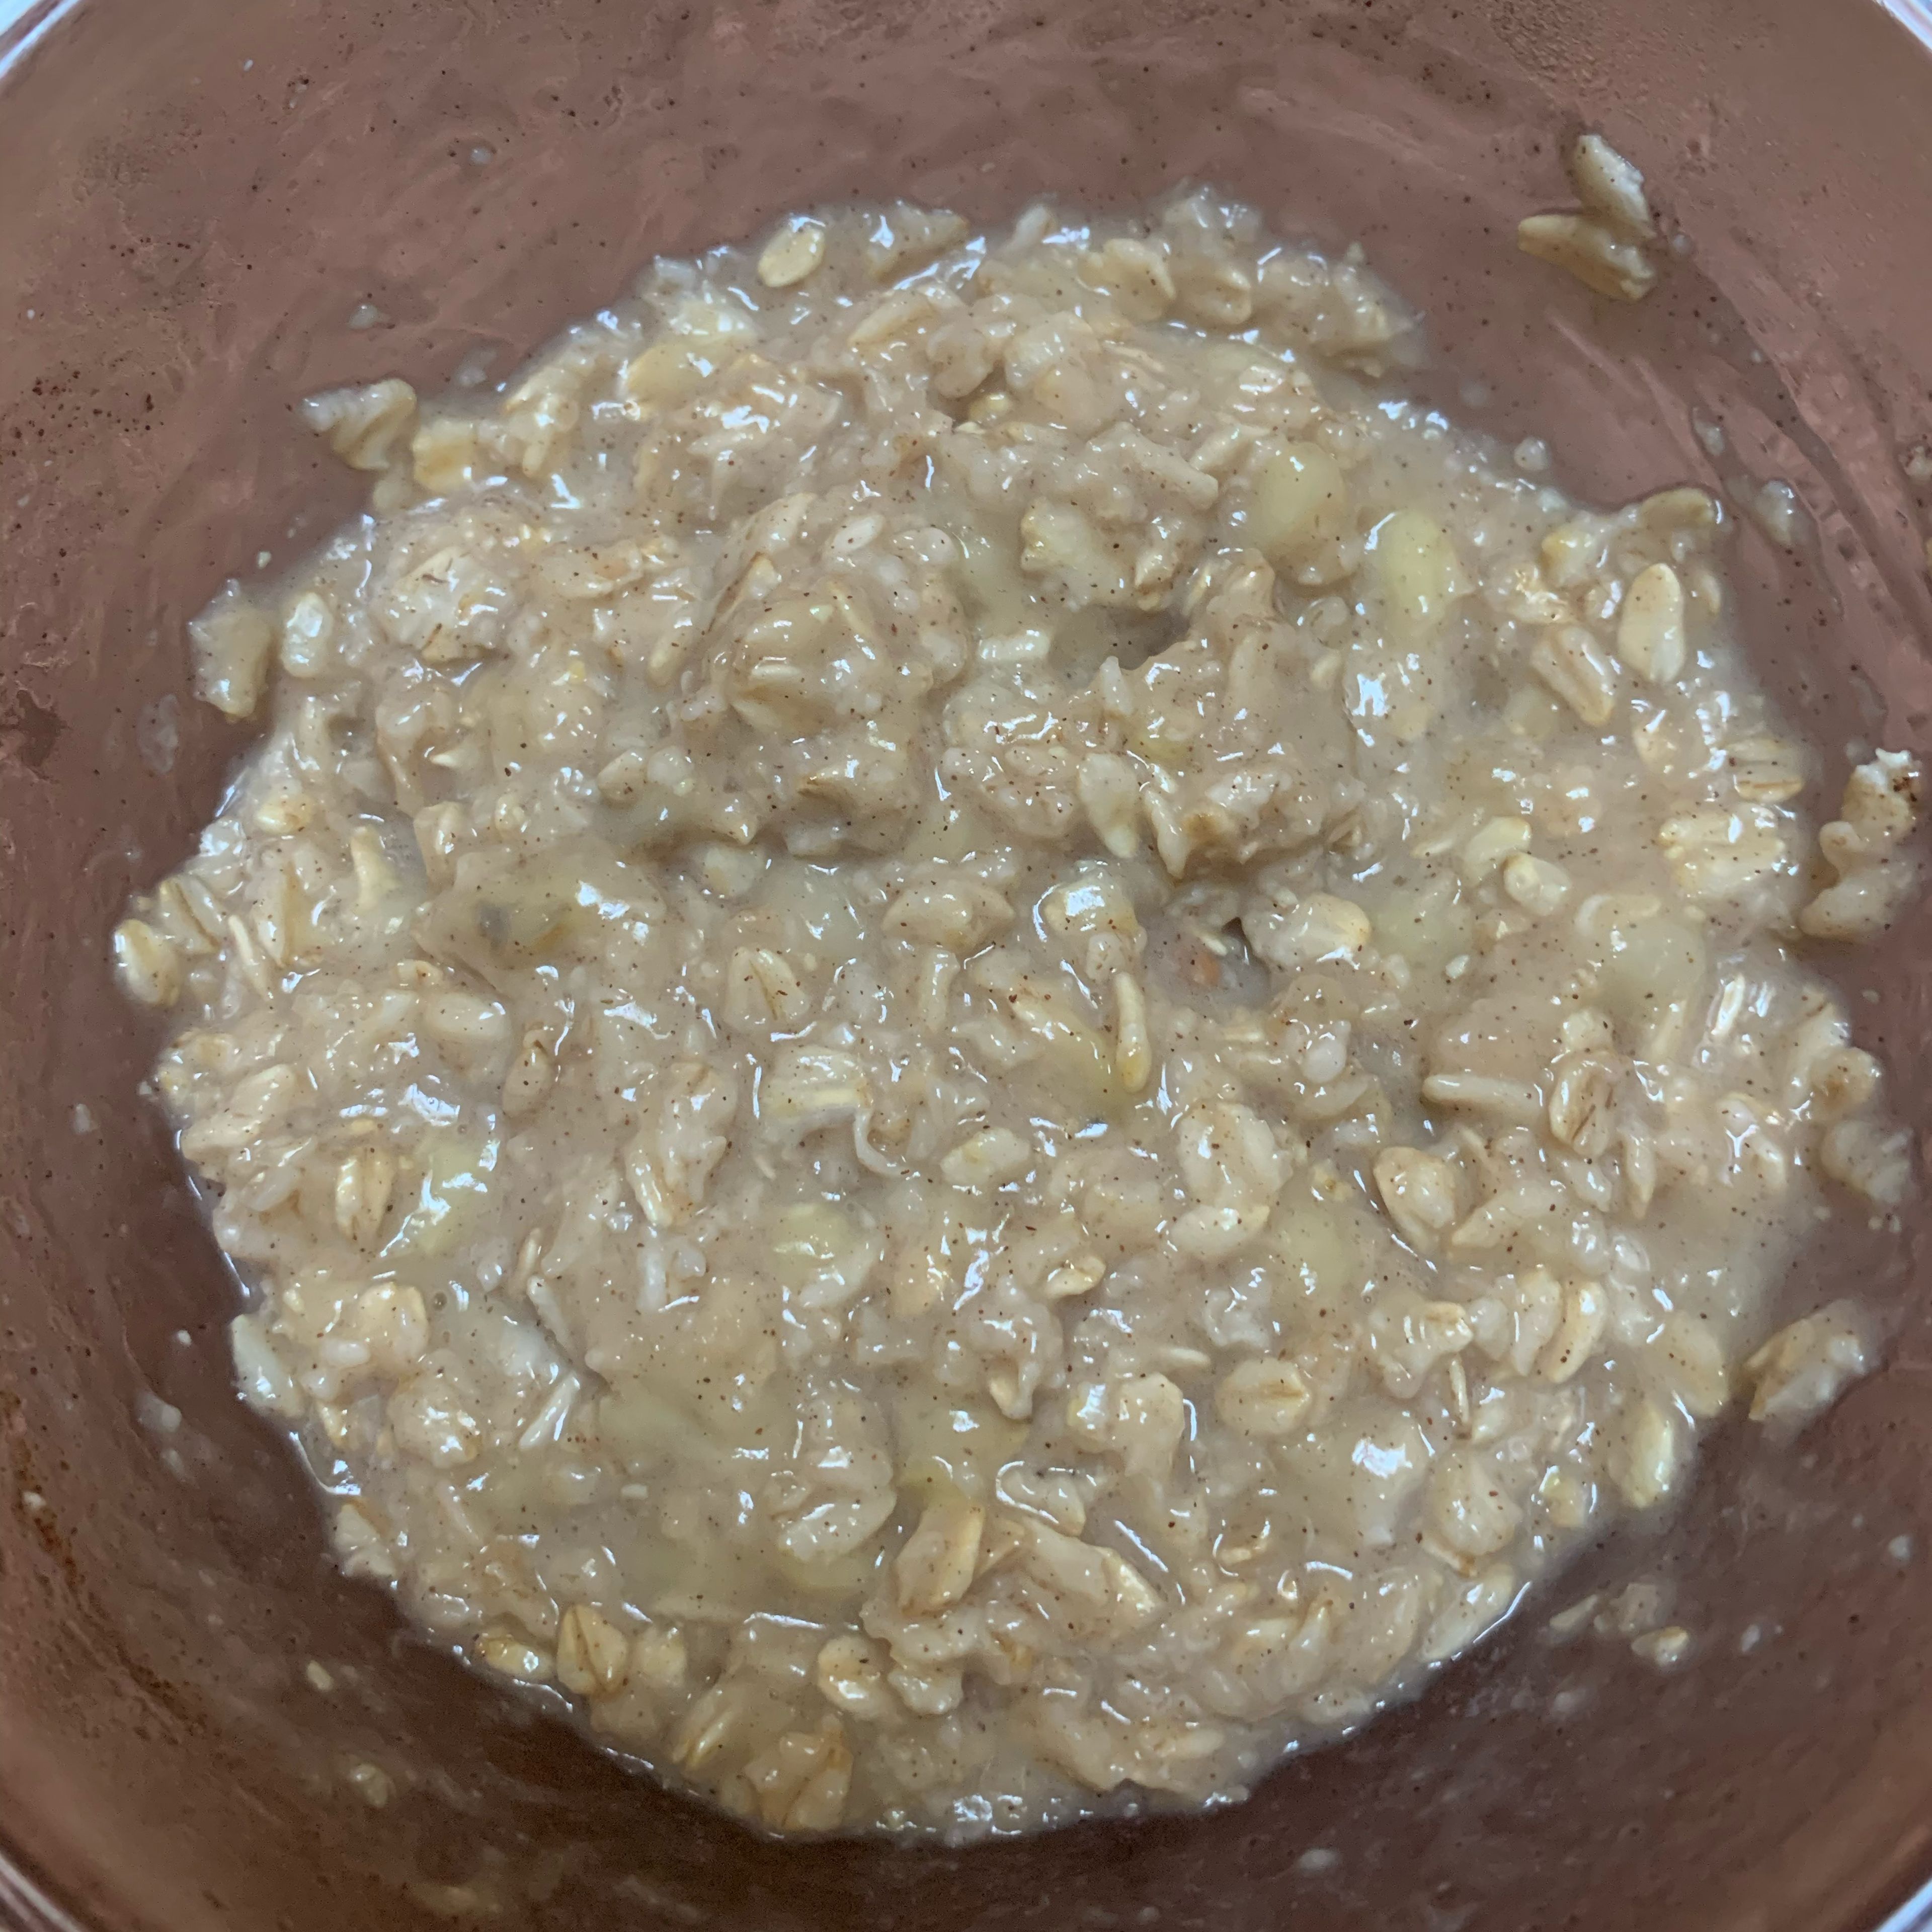 Microwave oats mixture 1-2 minutes, or until most of the water has been absorbed 